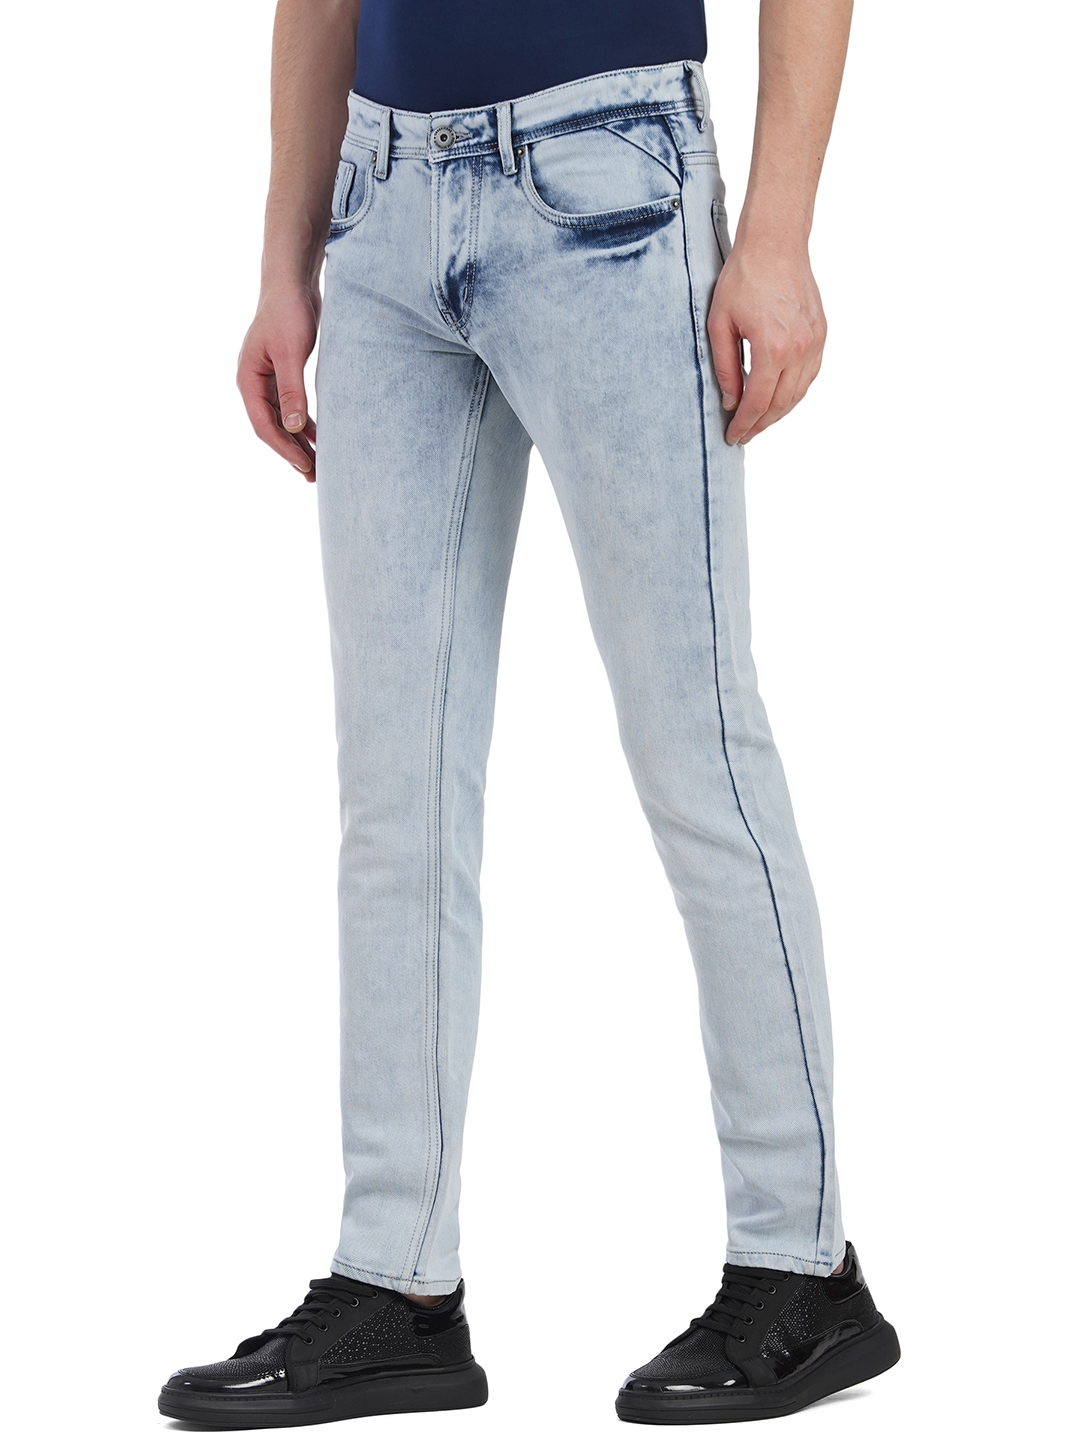 Greenfibre | Light Blue Washed Narrow Fit Jeans | Greenfibre 1